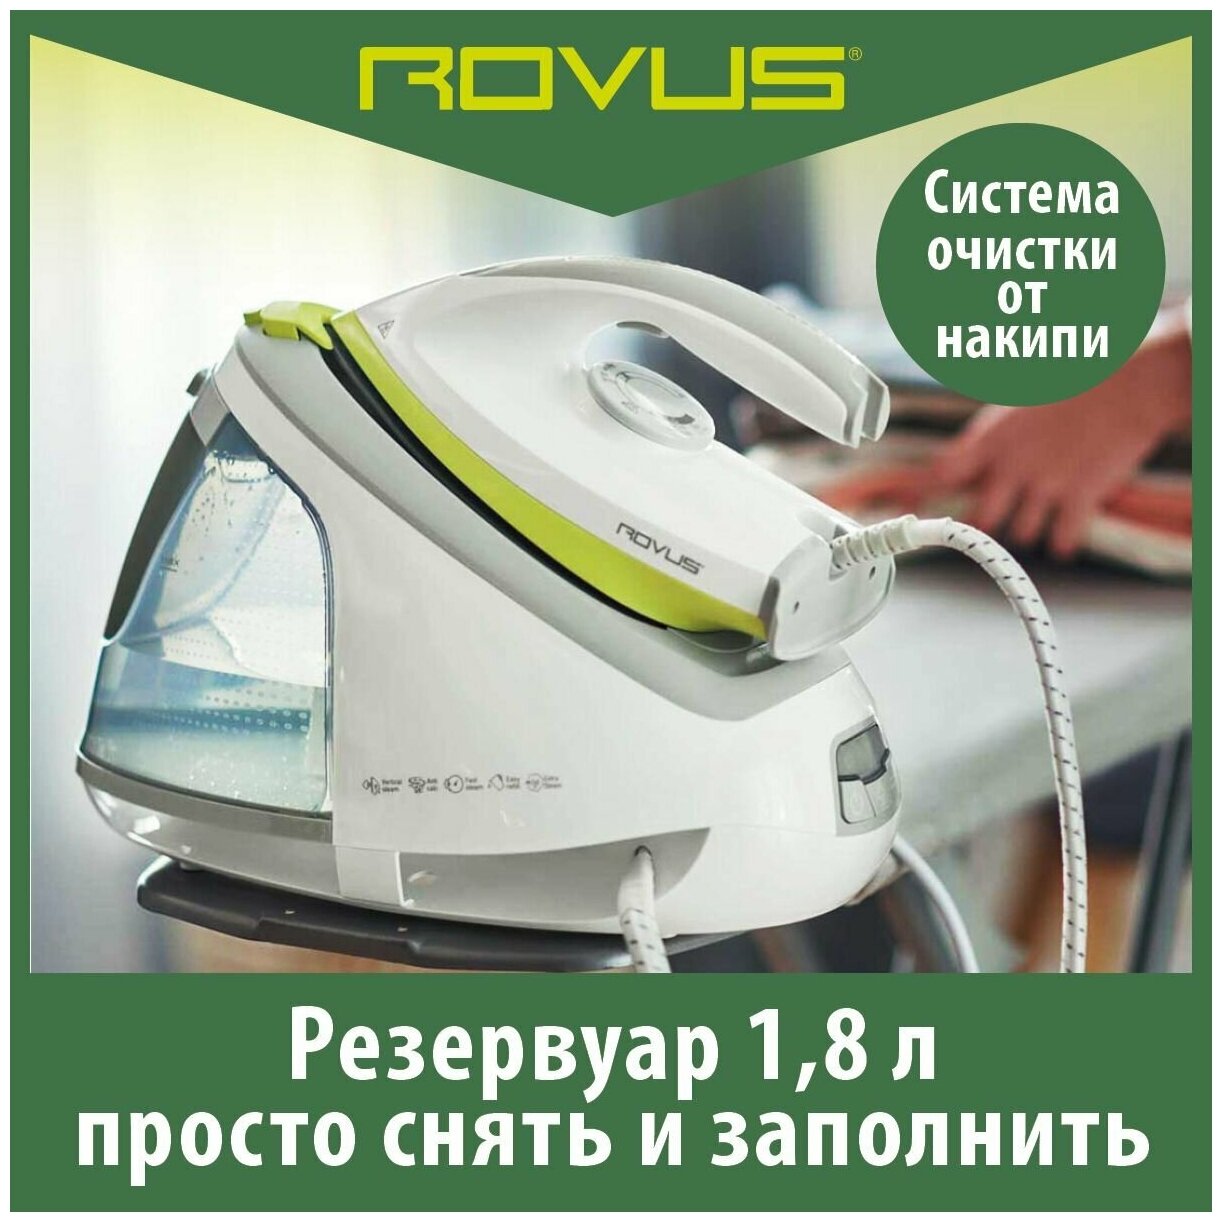 Gold rovus multipurpose steam station 19 in 1 фото 14